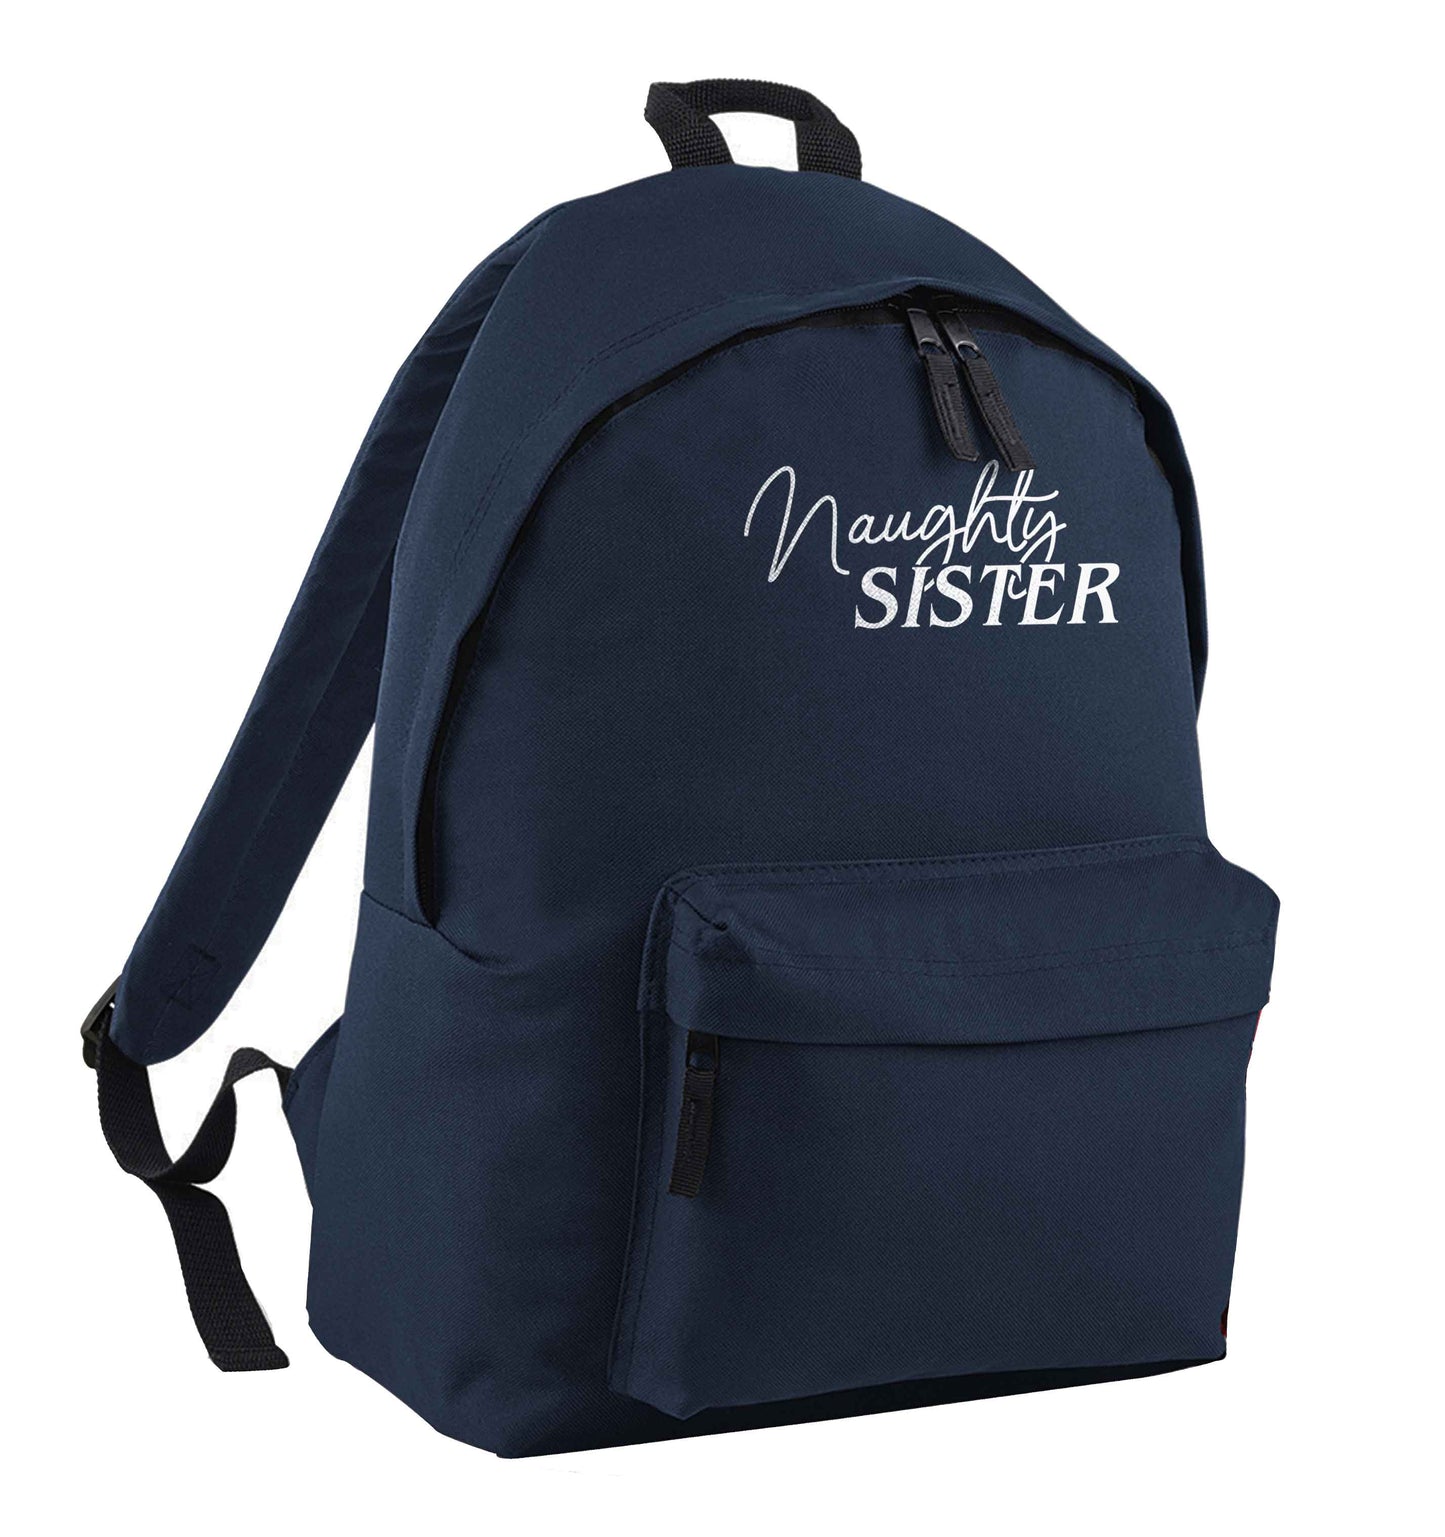 Naughty Sister navy adults backpack